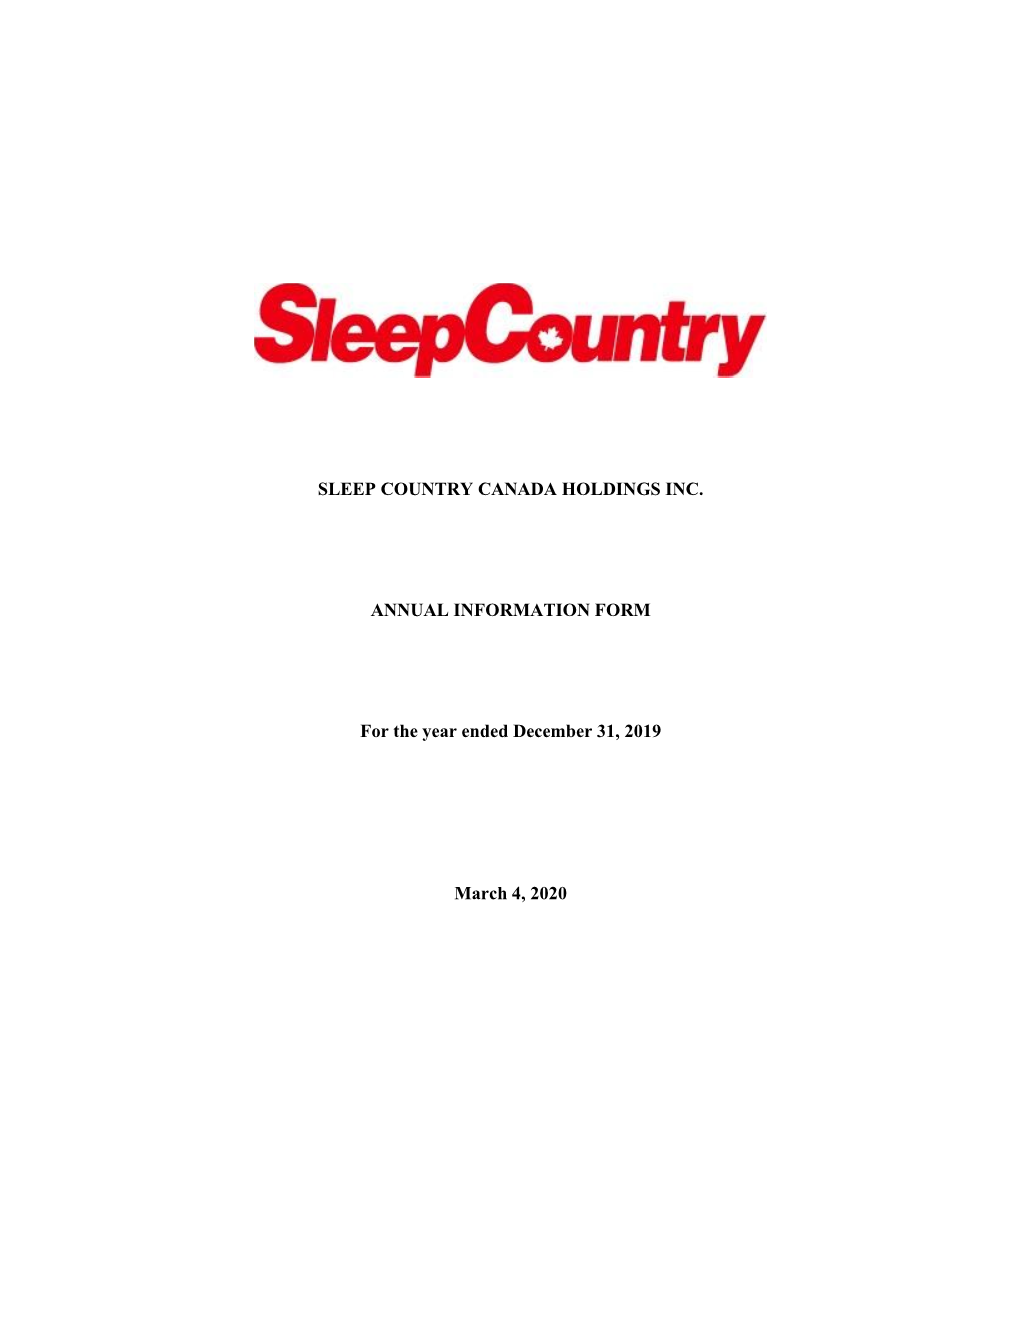 SLEEP COUNTRY CANADA HOLDINGS INC. ANNUAL INFORMATION FORM for the Year Ended December 31, 2019 March 4, 2020